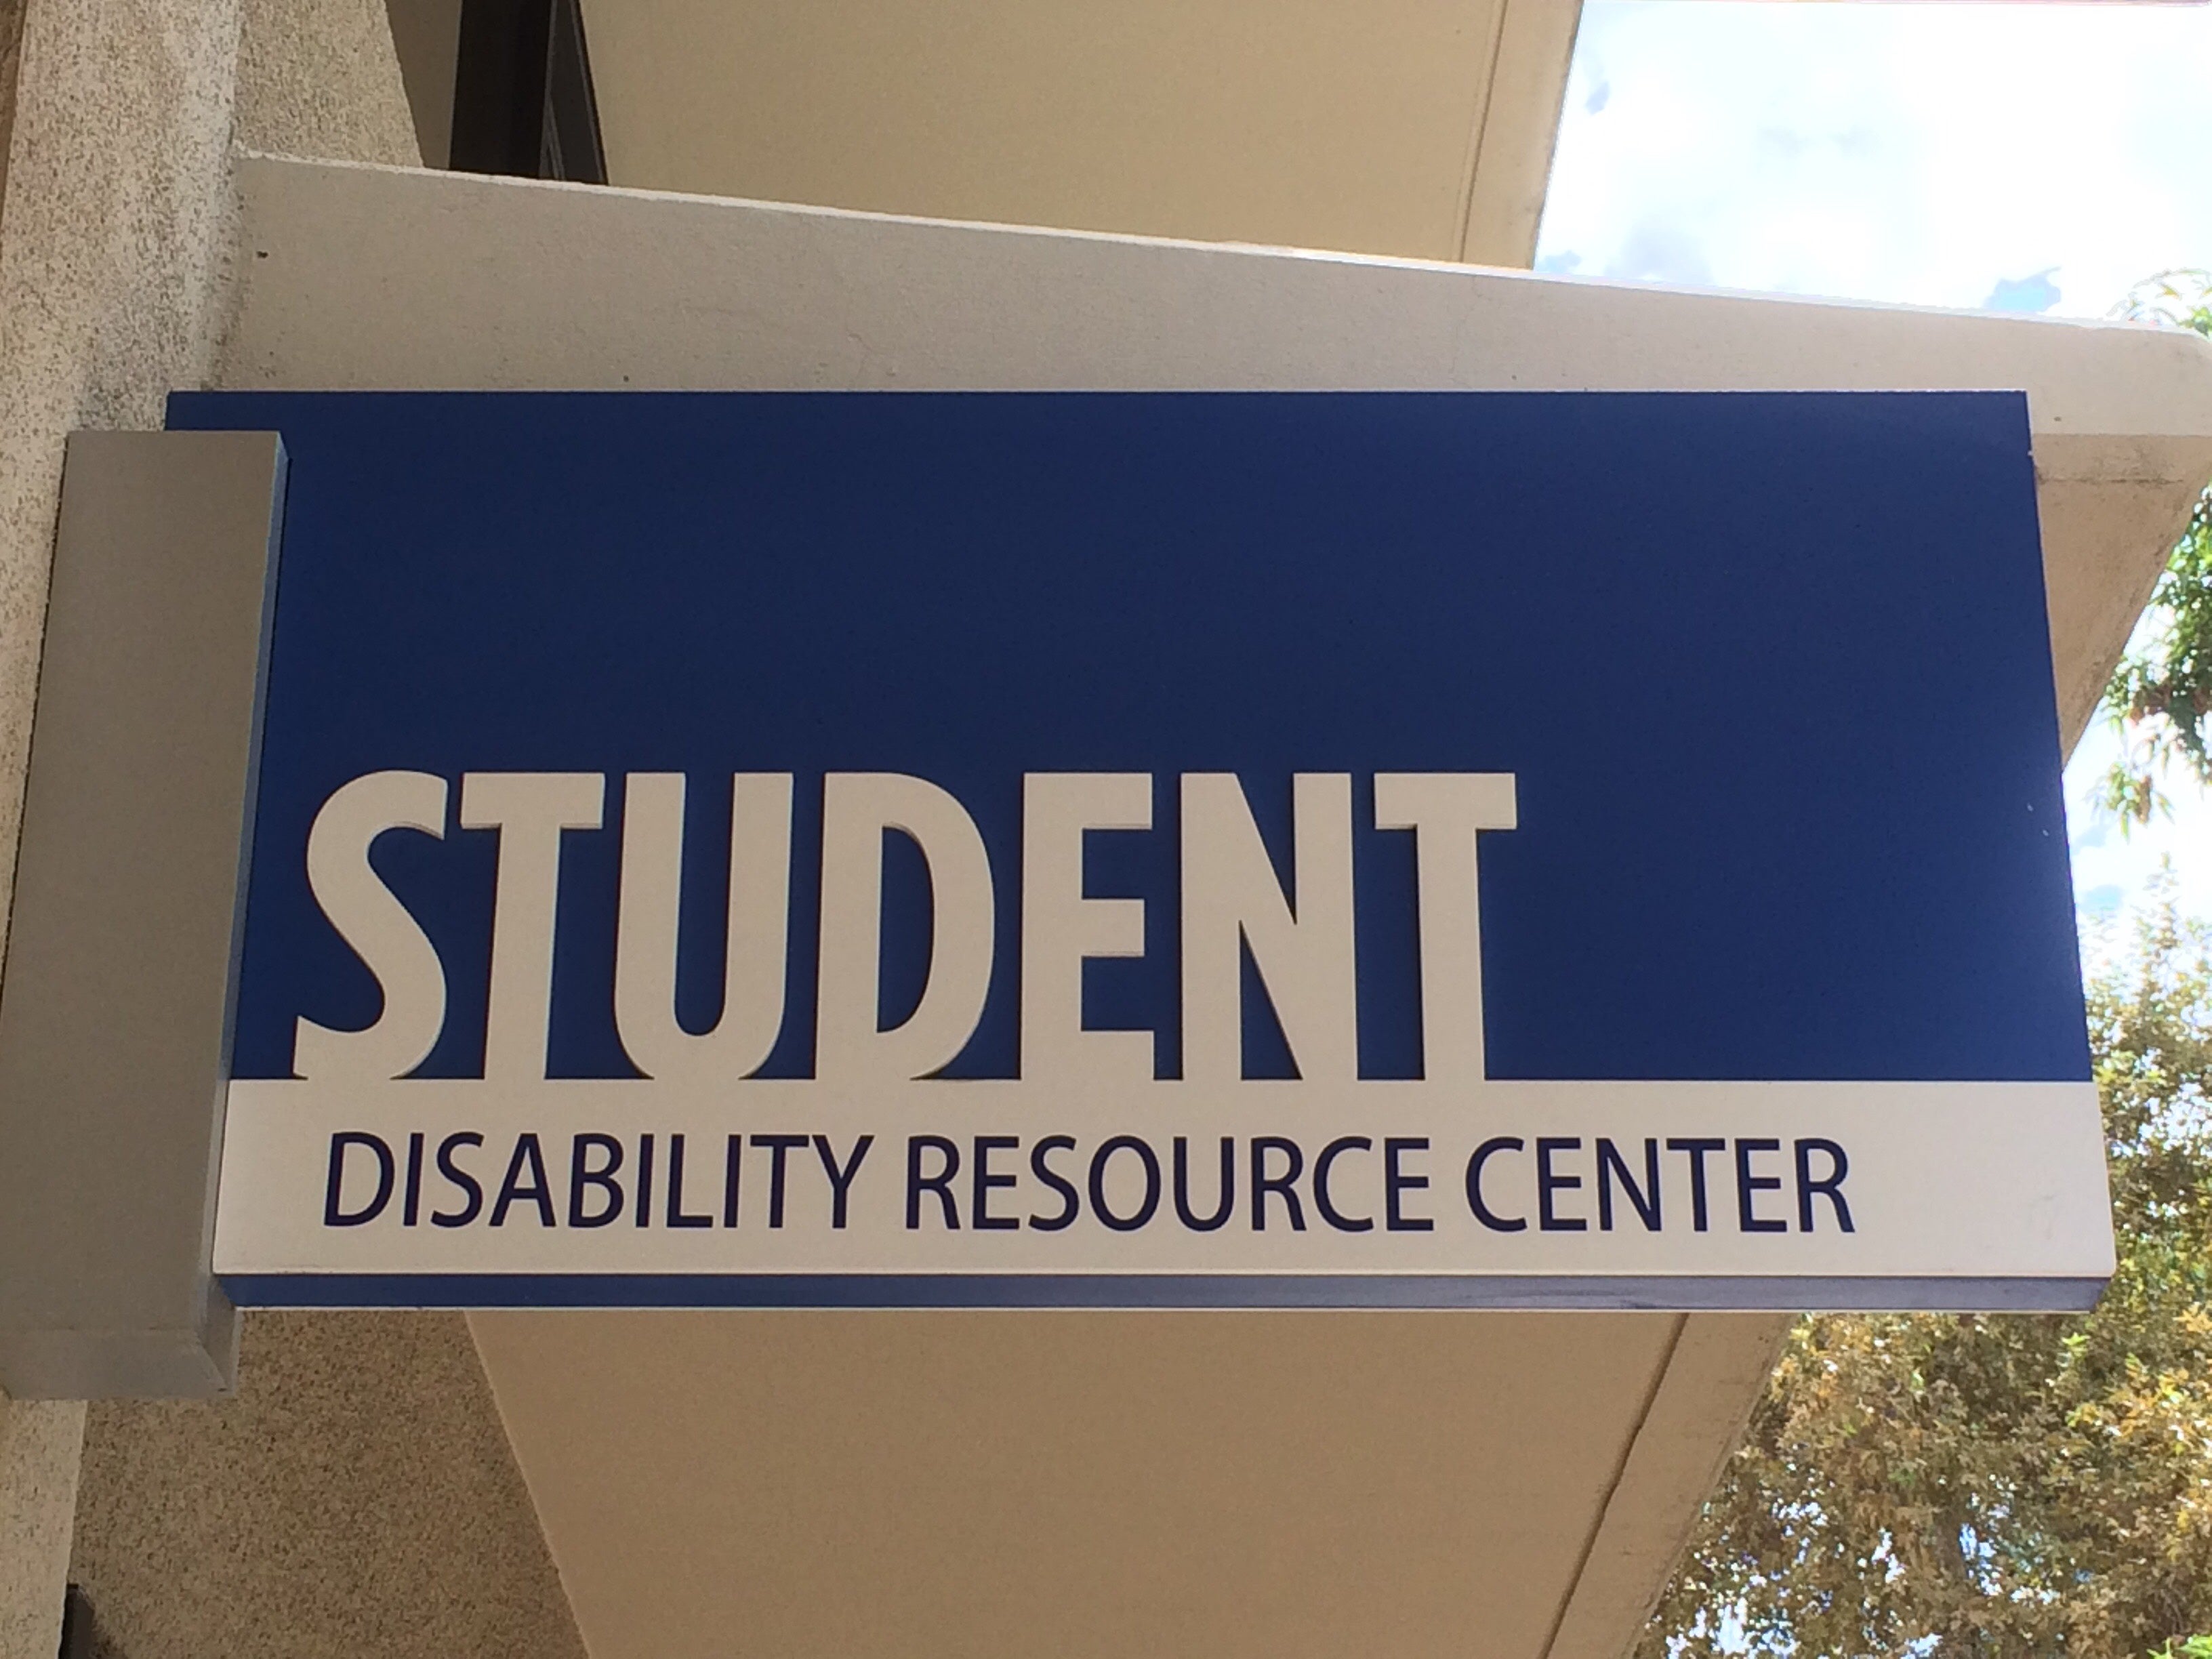 The SDRC has been serving students on the UCR campus for more than 50 years.